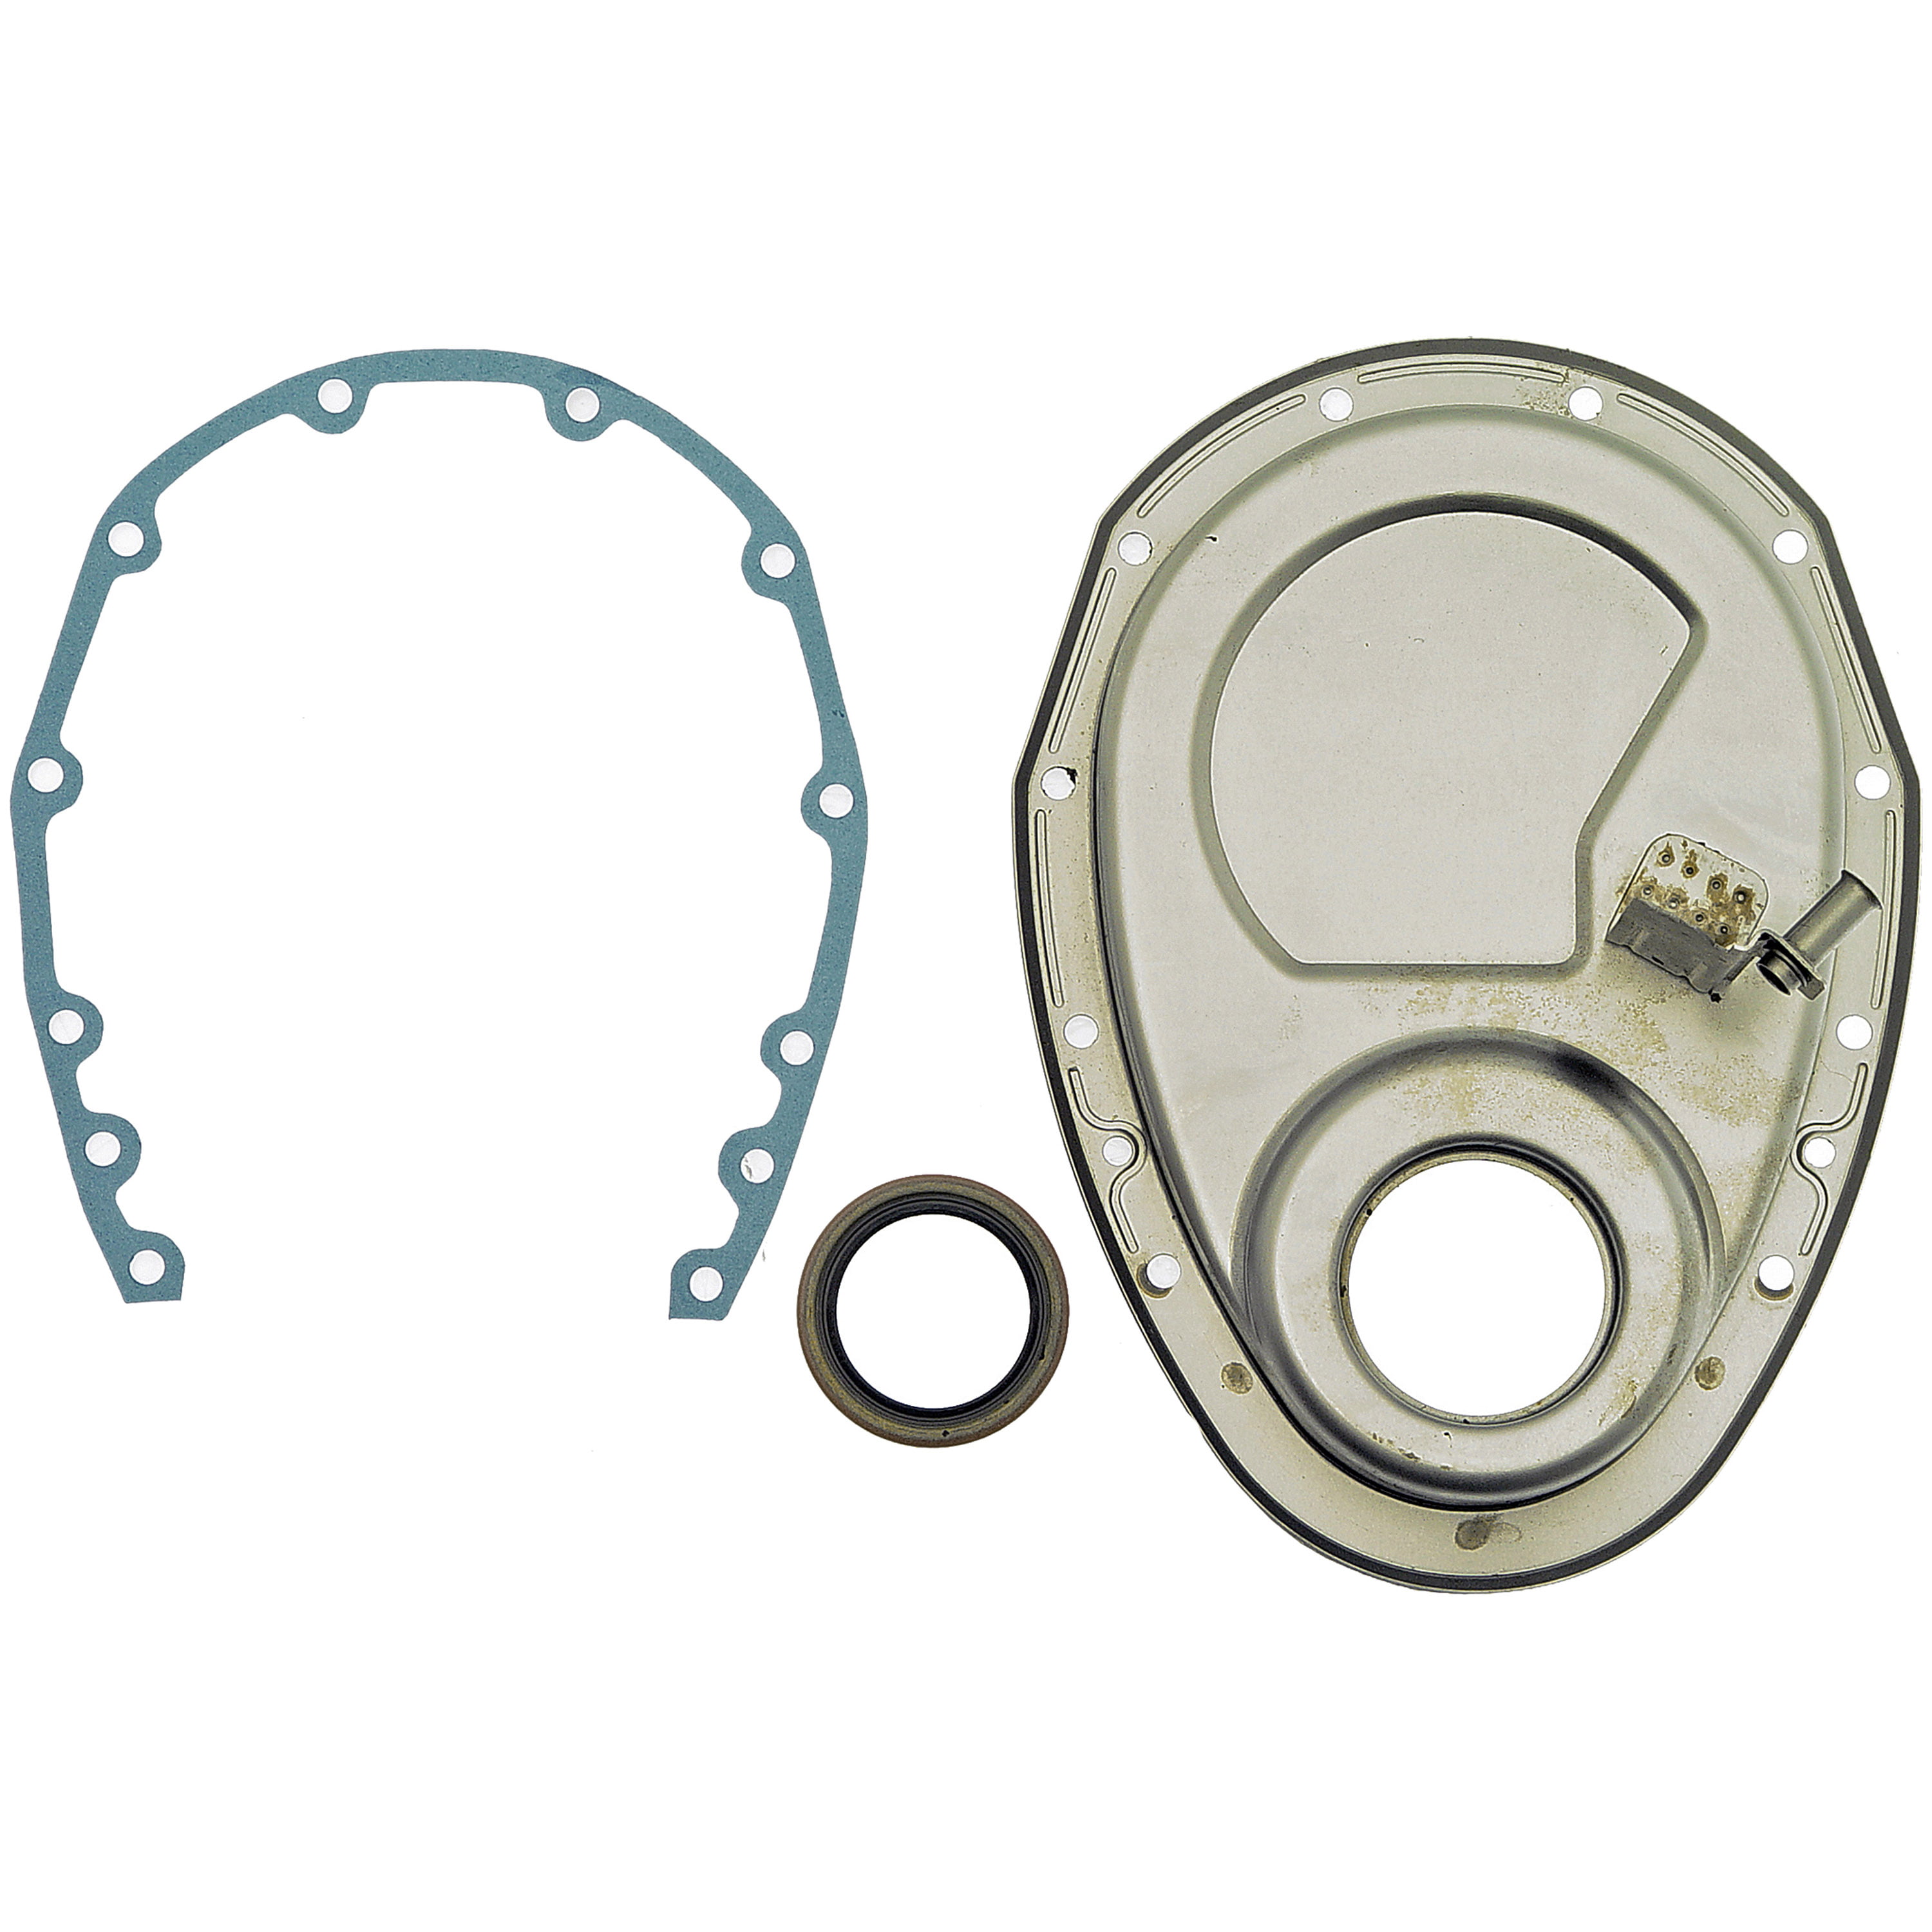 Dorman Timing Chain Cover w/ Gaskets for Chevy GMC Pontiac Olds V8